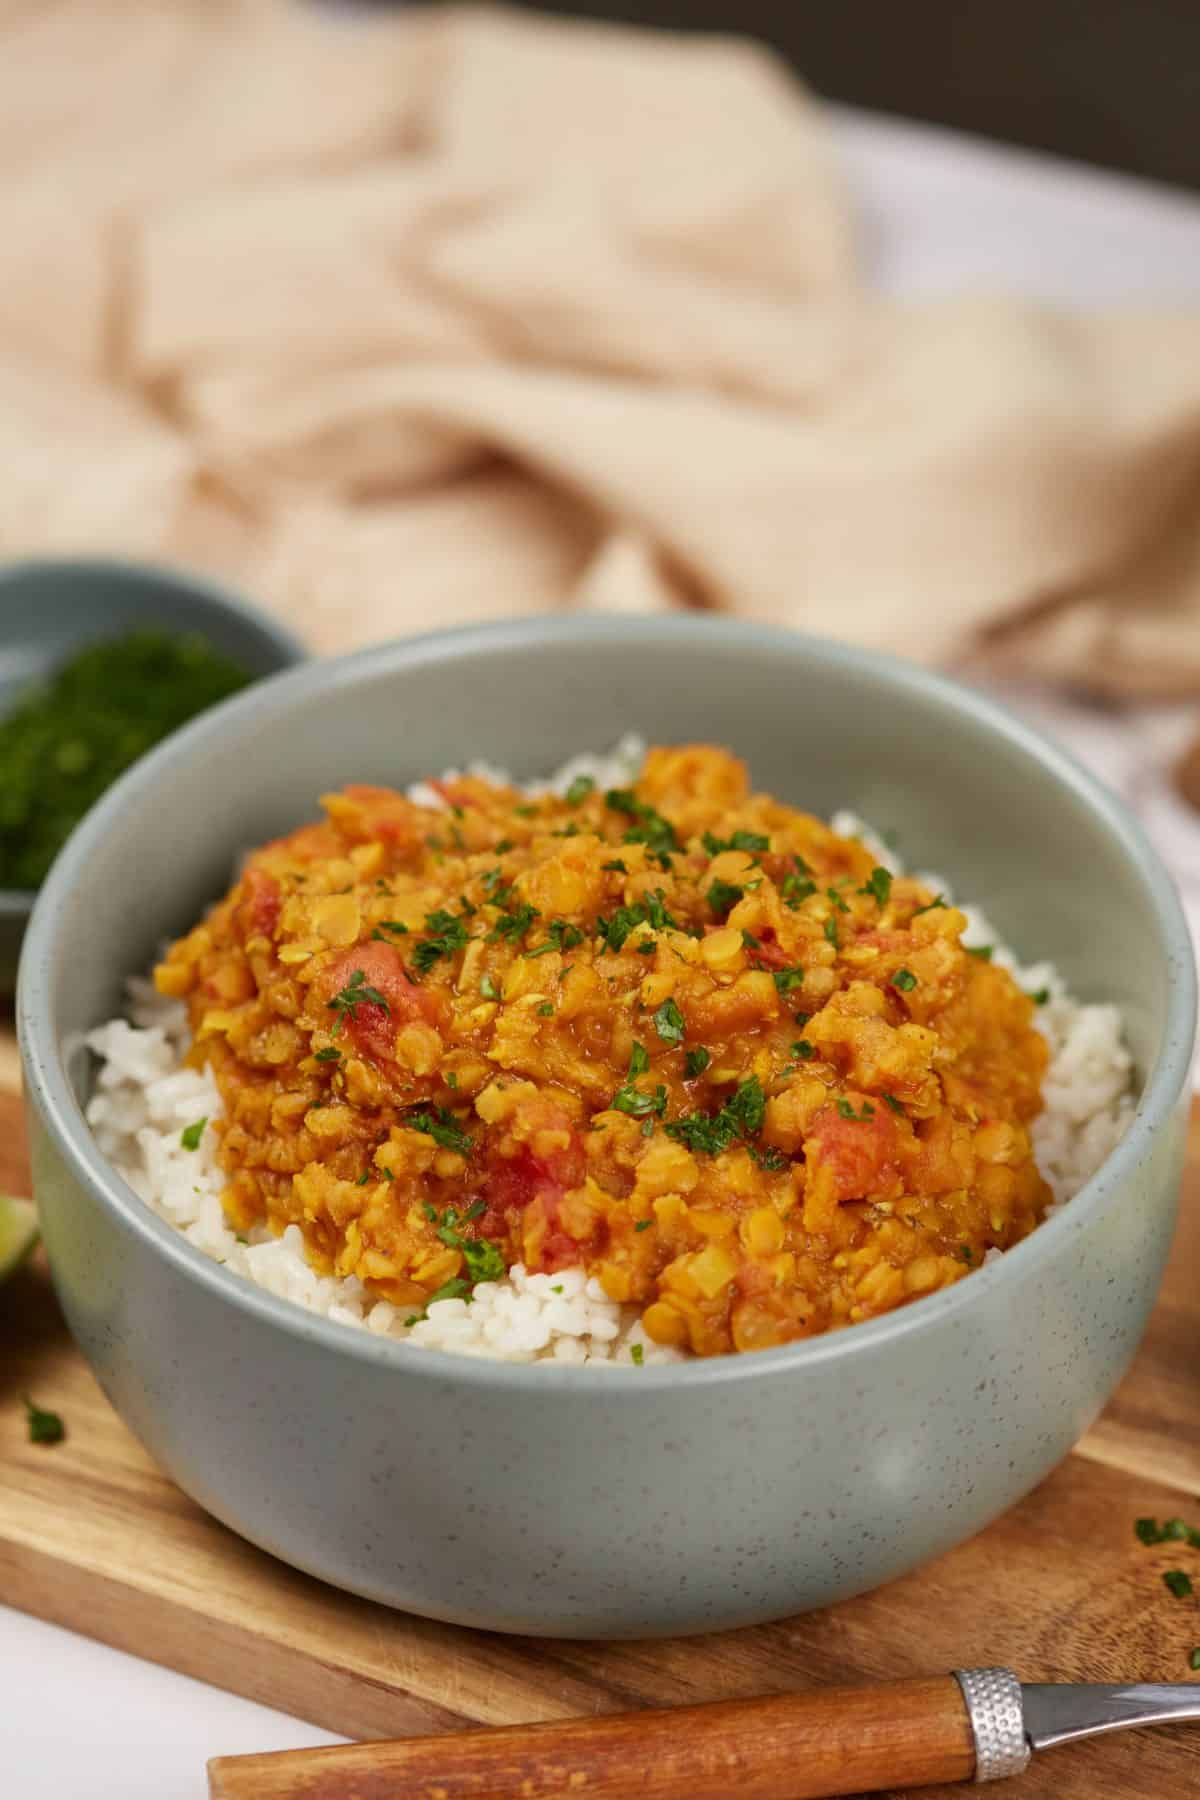 lentil dahl in bowl with rice on wood board by cream napkin